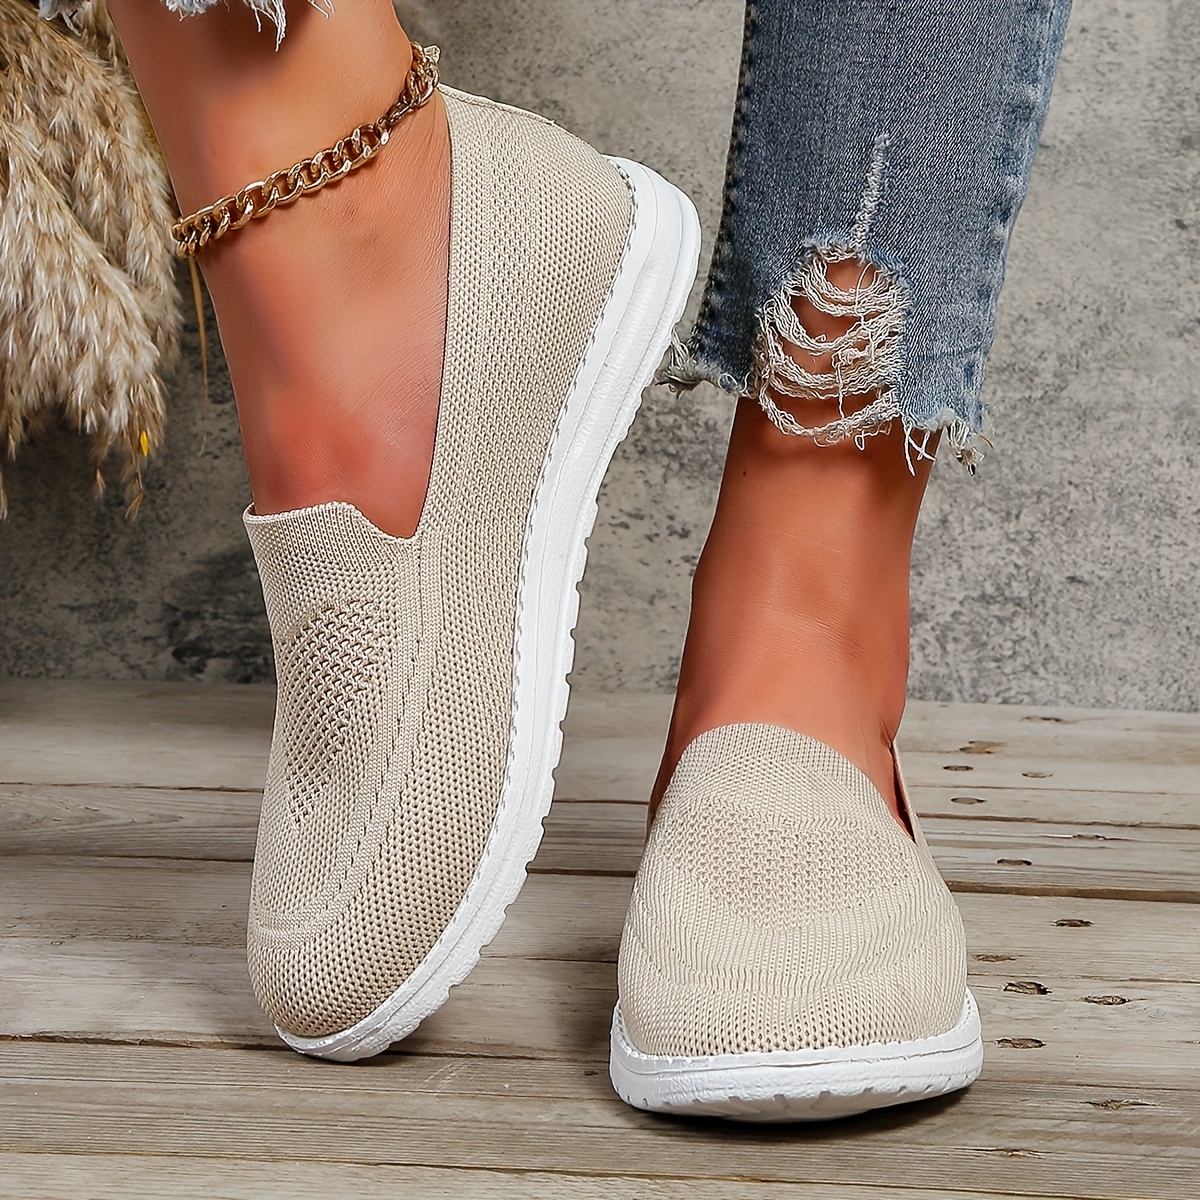 mesh sneakers women s breathable casual slip outdoor shoes